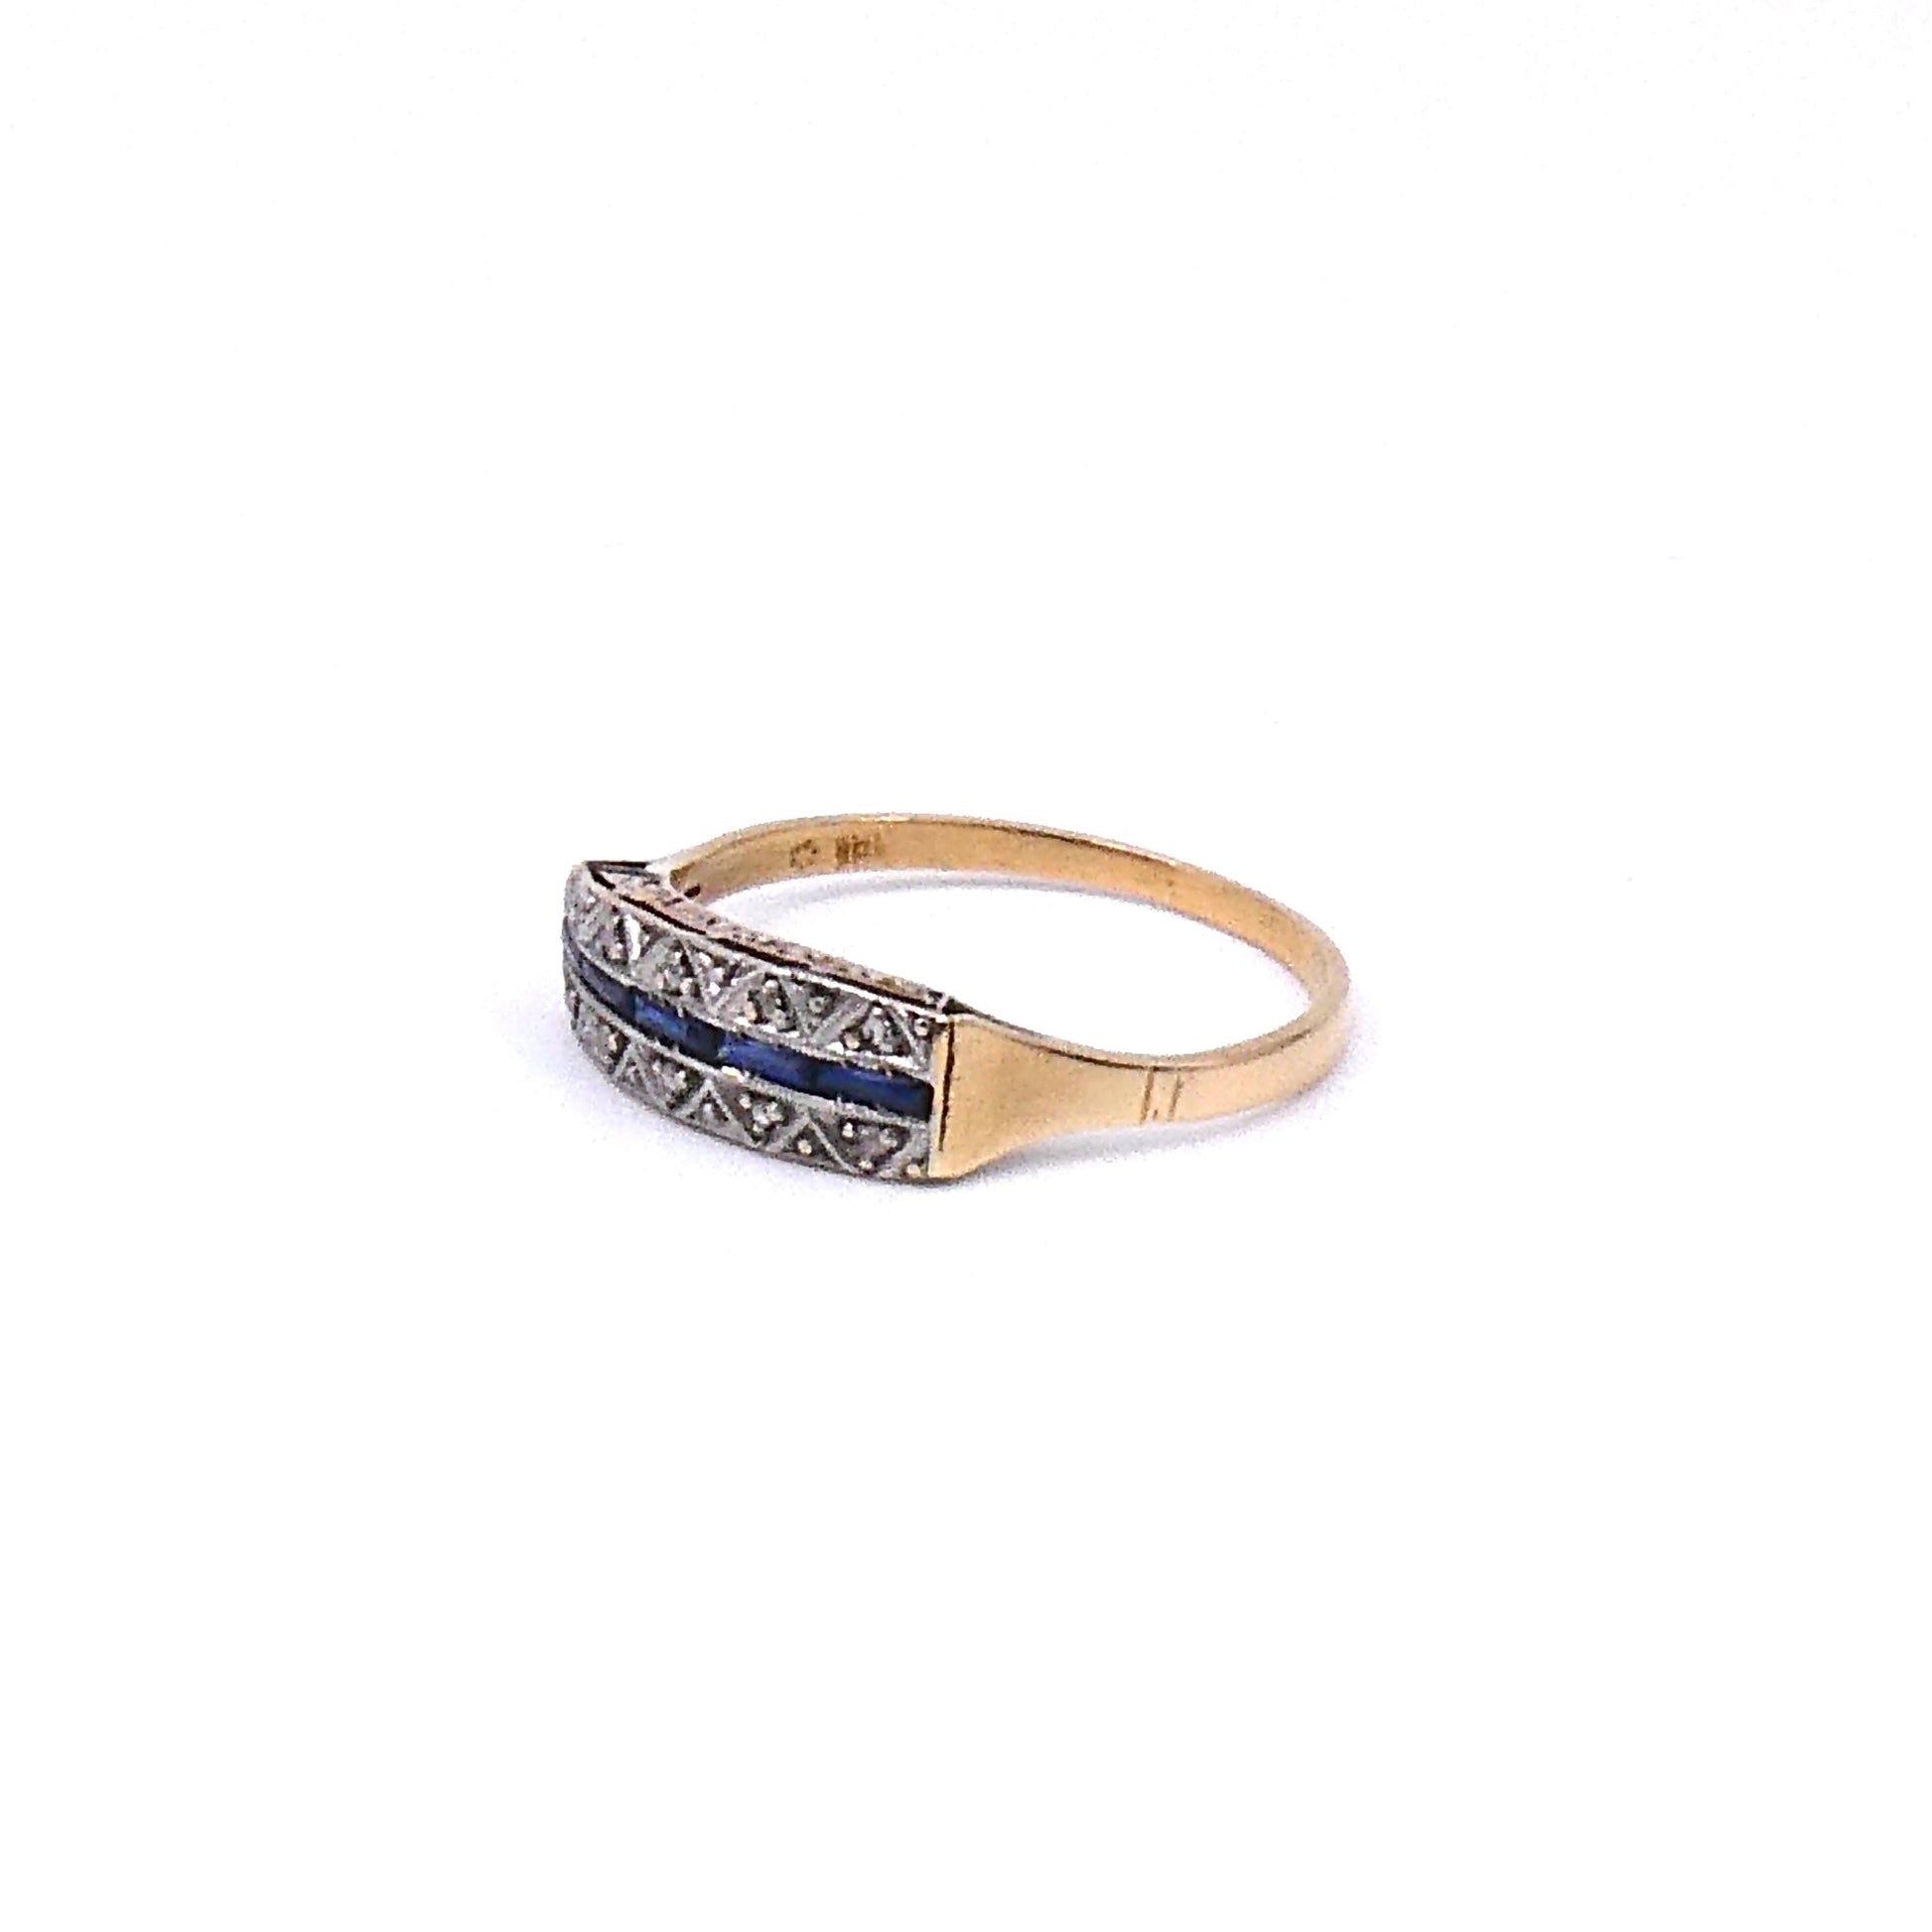 Art Deco style sapphire, platinum ring in 18k gold, an ideal sapphire ring for everyday. - Collected